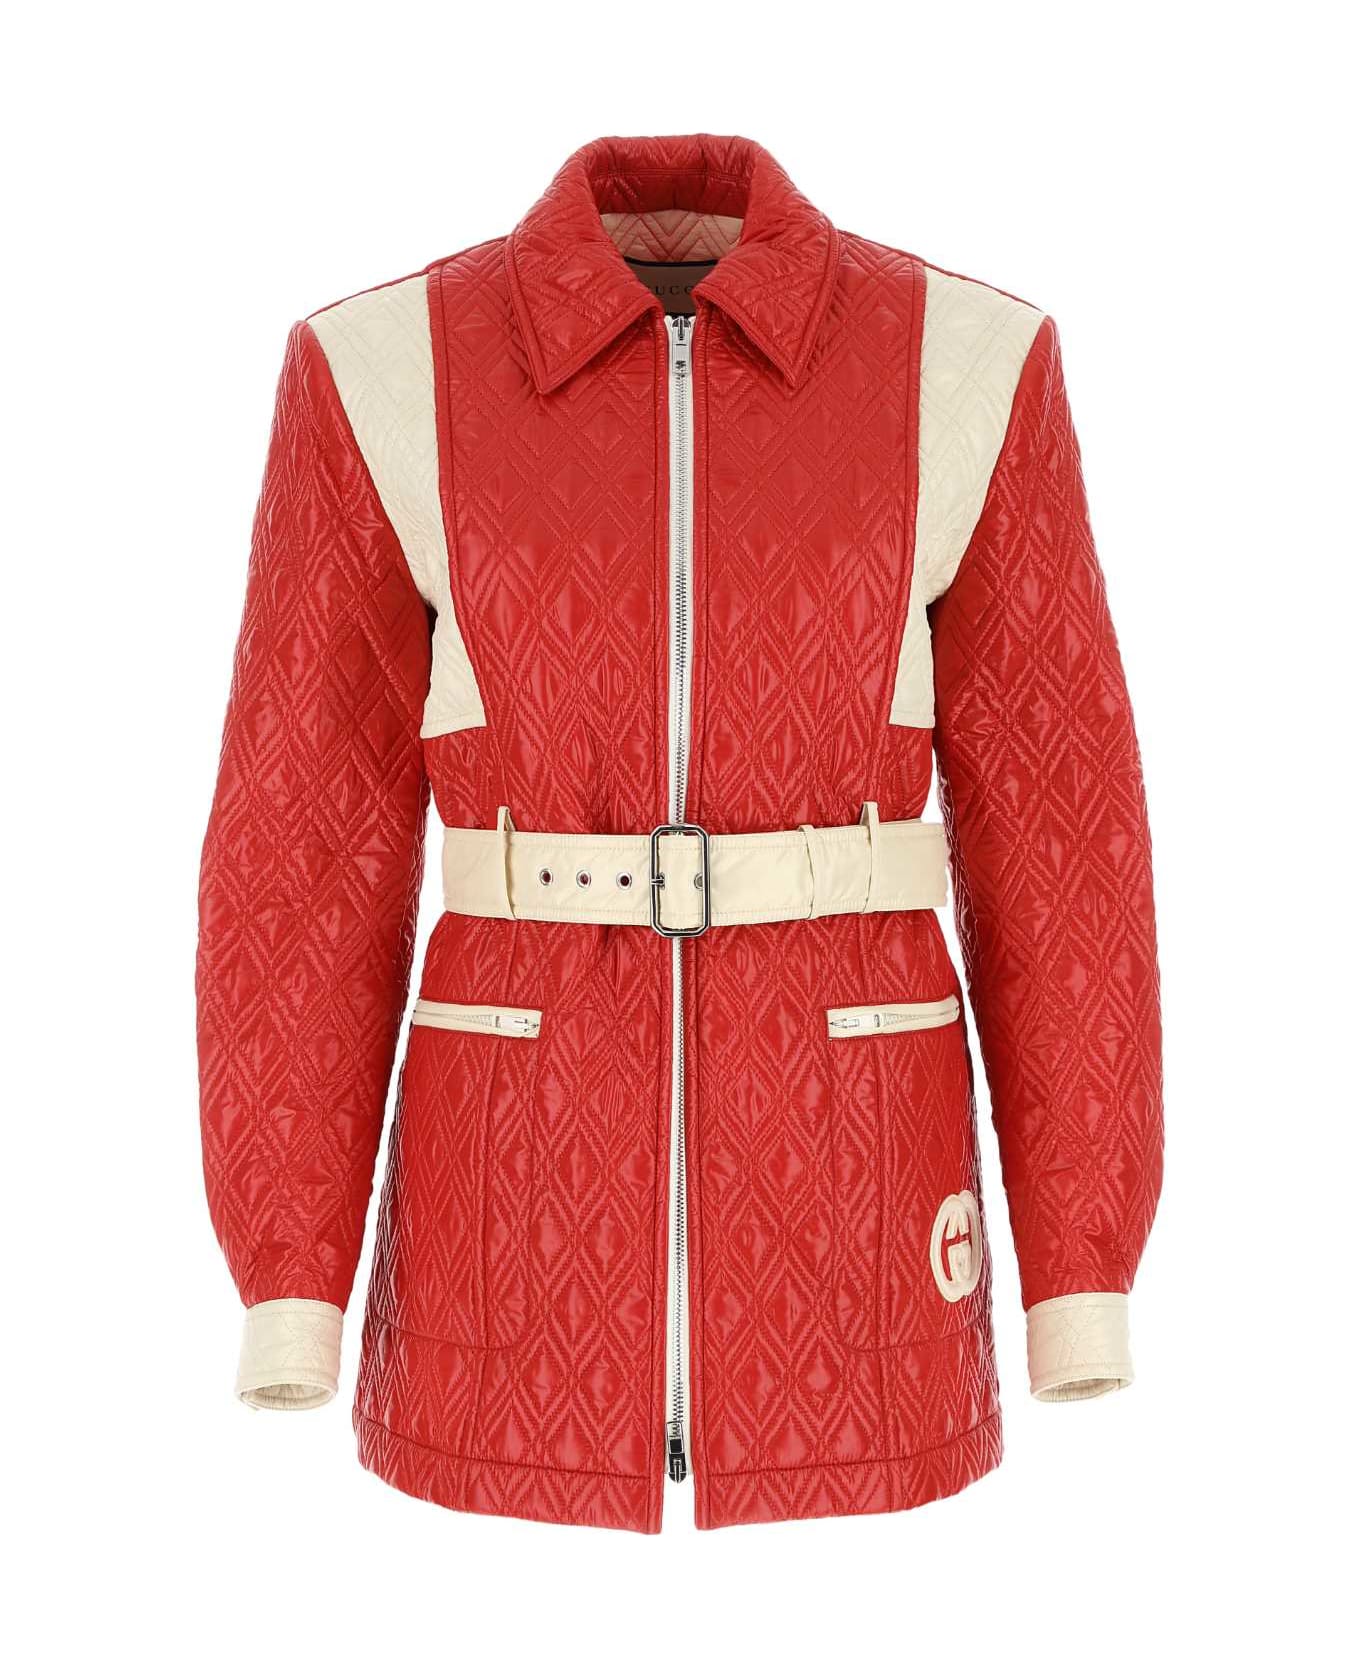 Gucci Red Polyester Jacket - Multicolor ジャケット